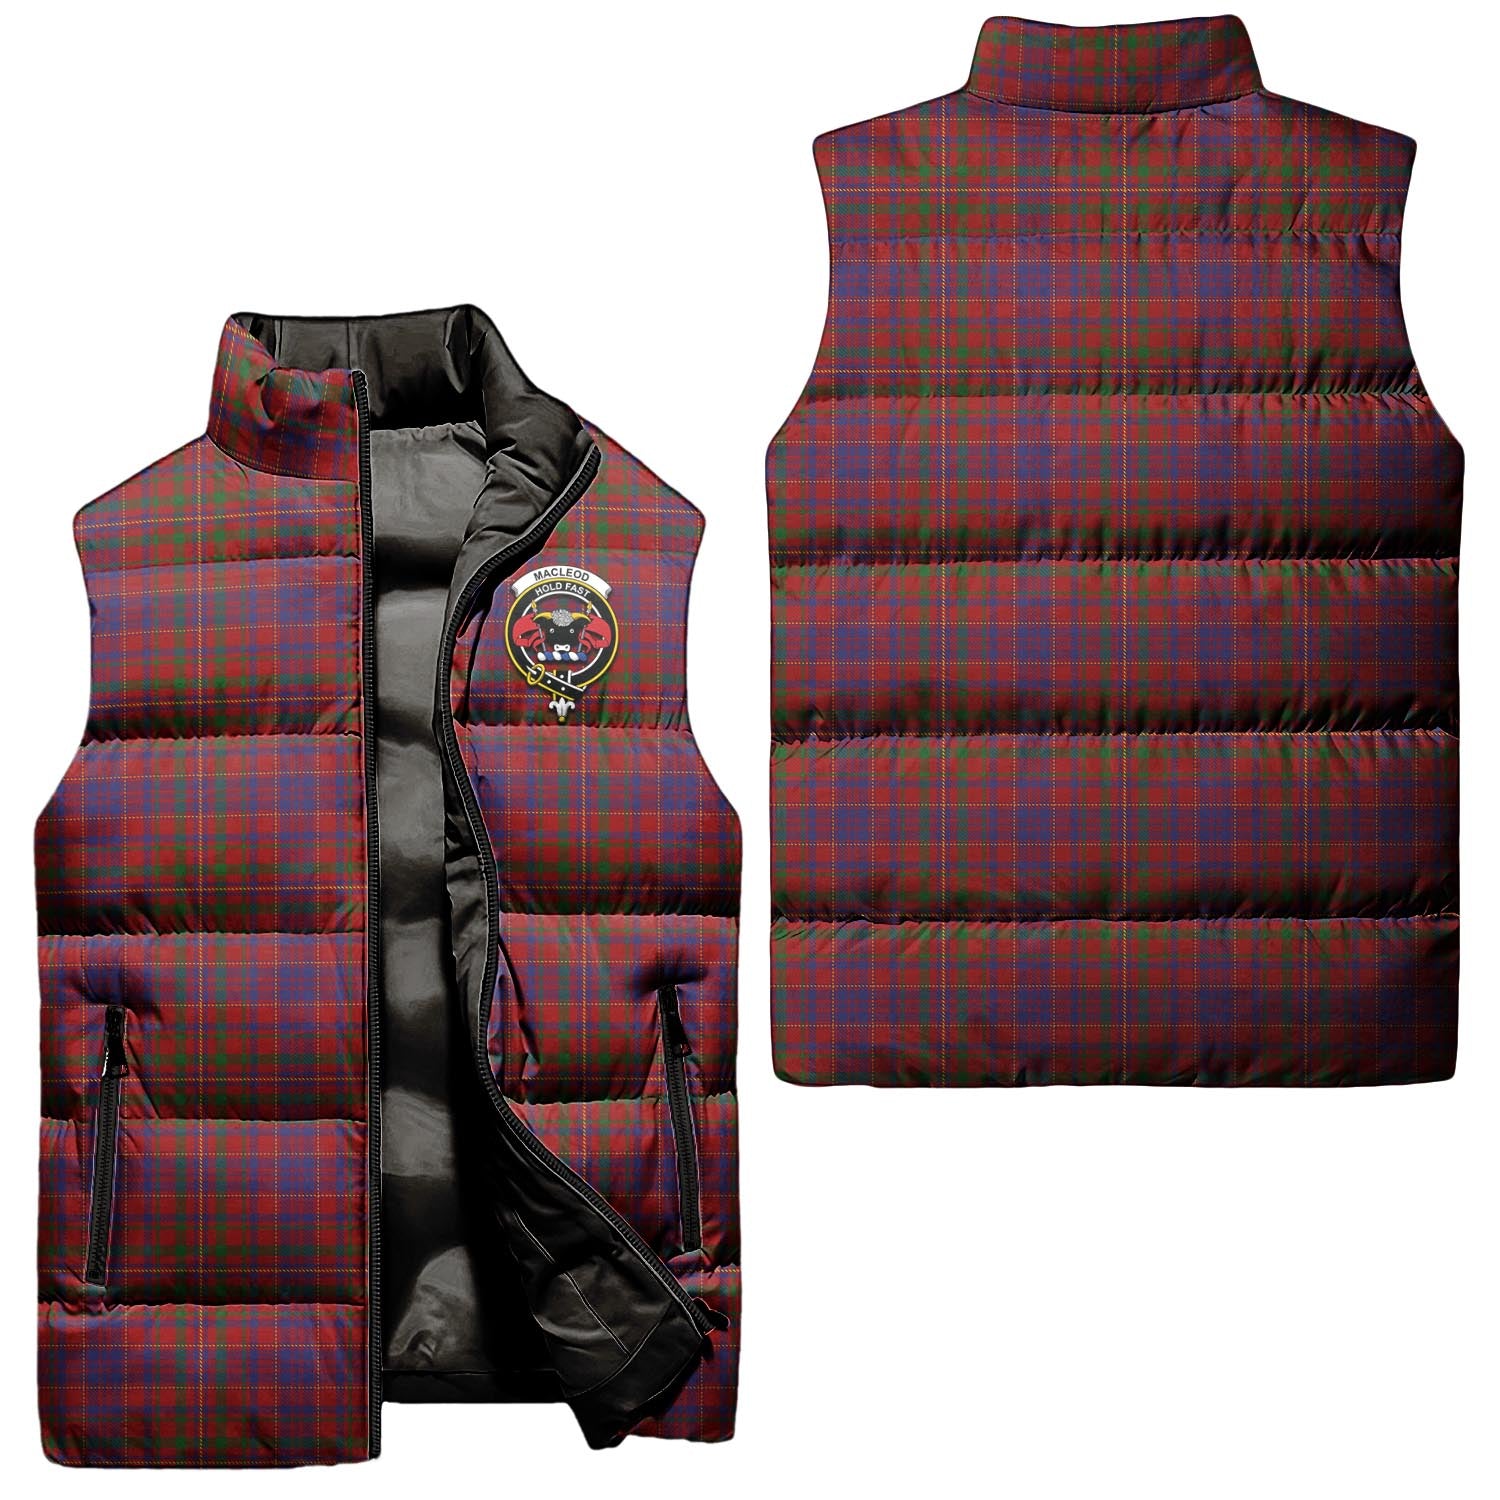 macleod-red-clan-puffer-vest-family-crest-plaid-sleeveless-down-jacket